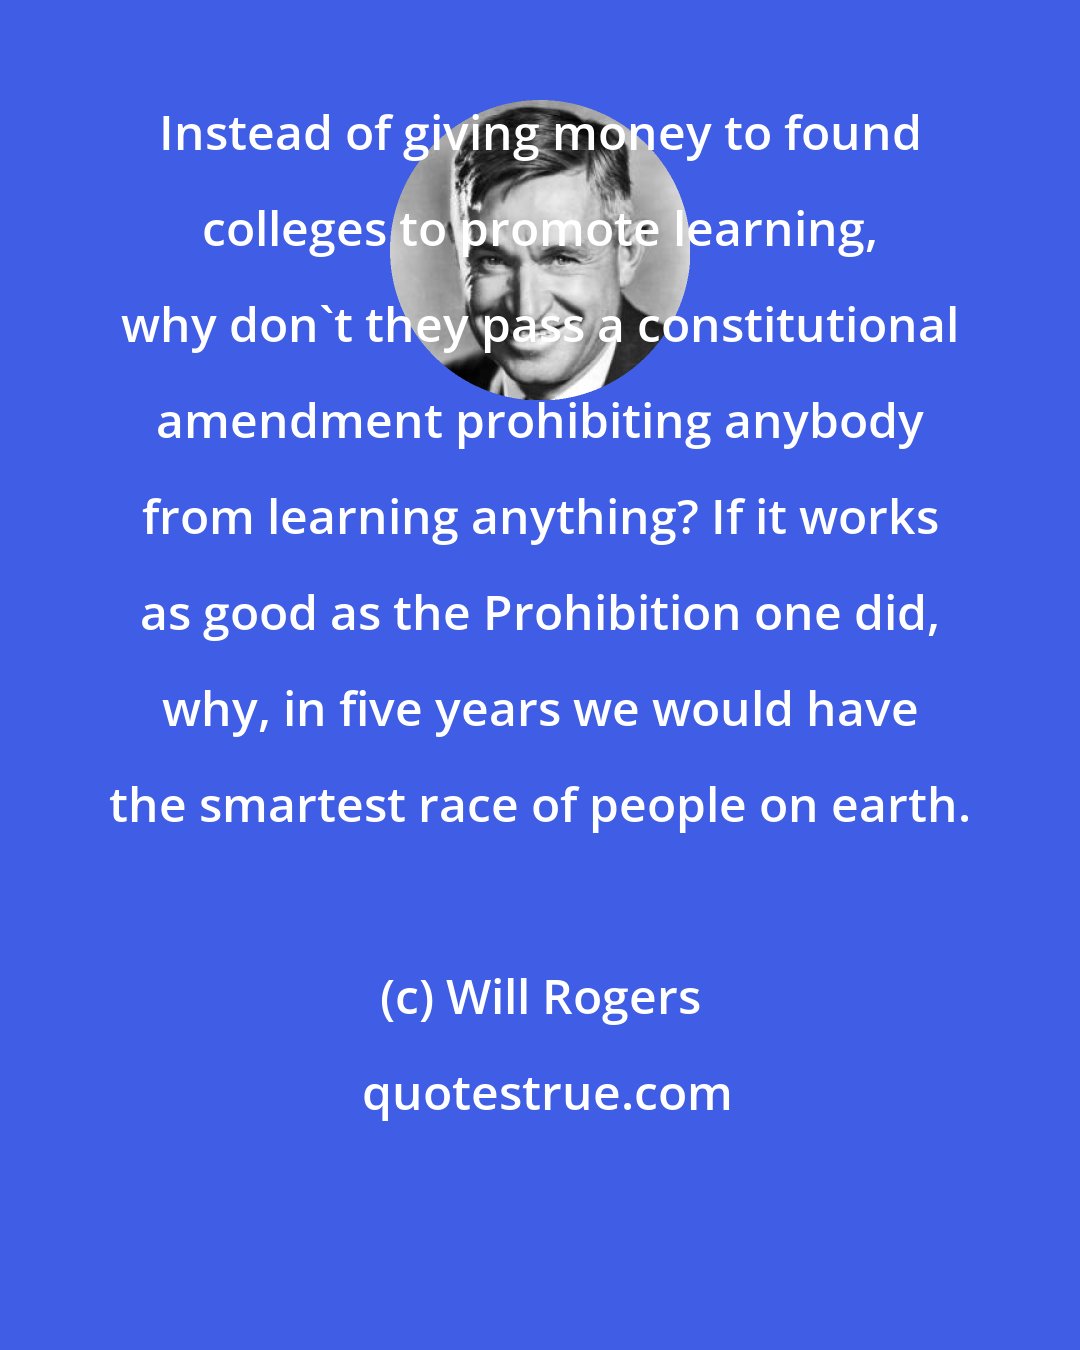 Will Rogers: Instead of giving money to found colleges to promote learning, why don't they pass a constitutional amendment prohibiting anybody from learning anything? If it works as good as the Prohibition one did, why, in five years we would have the smartest race of people on earth.